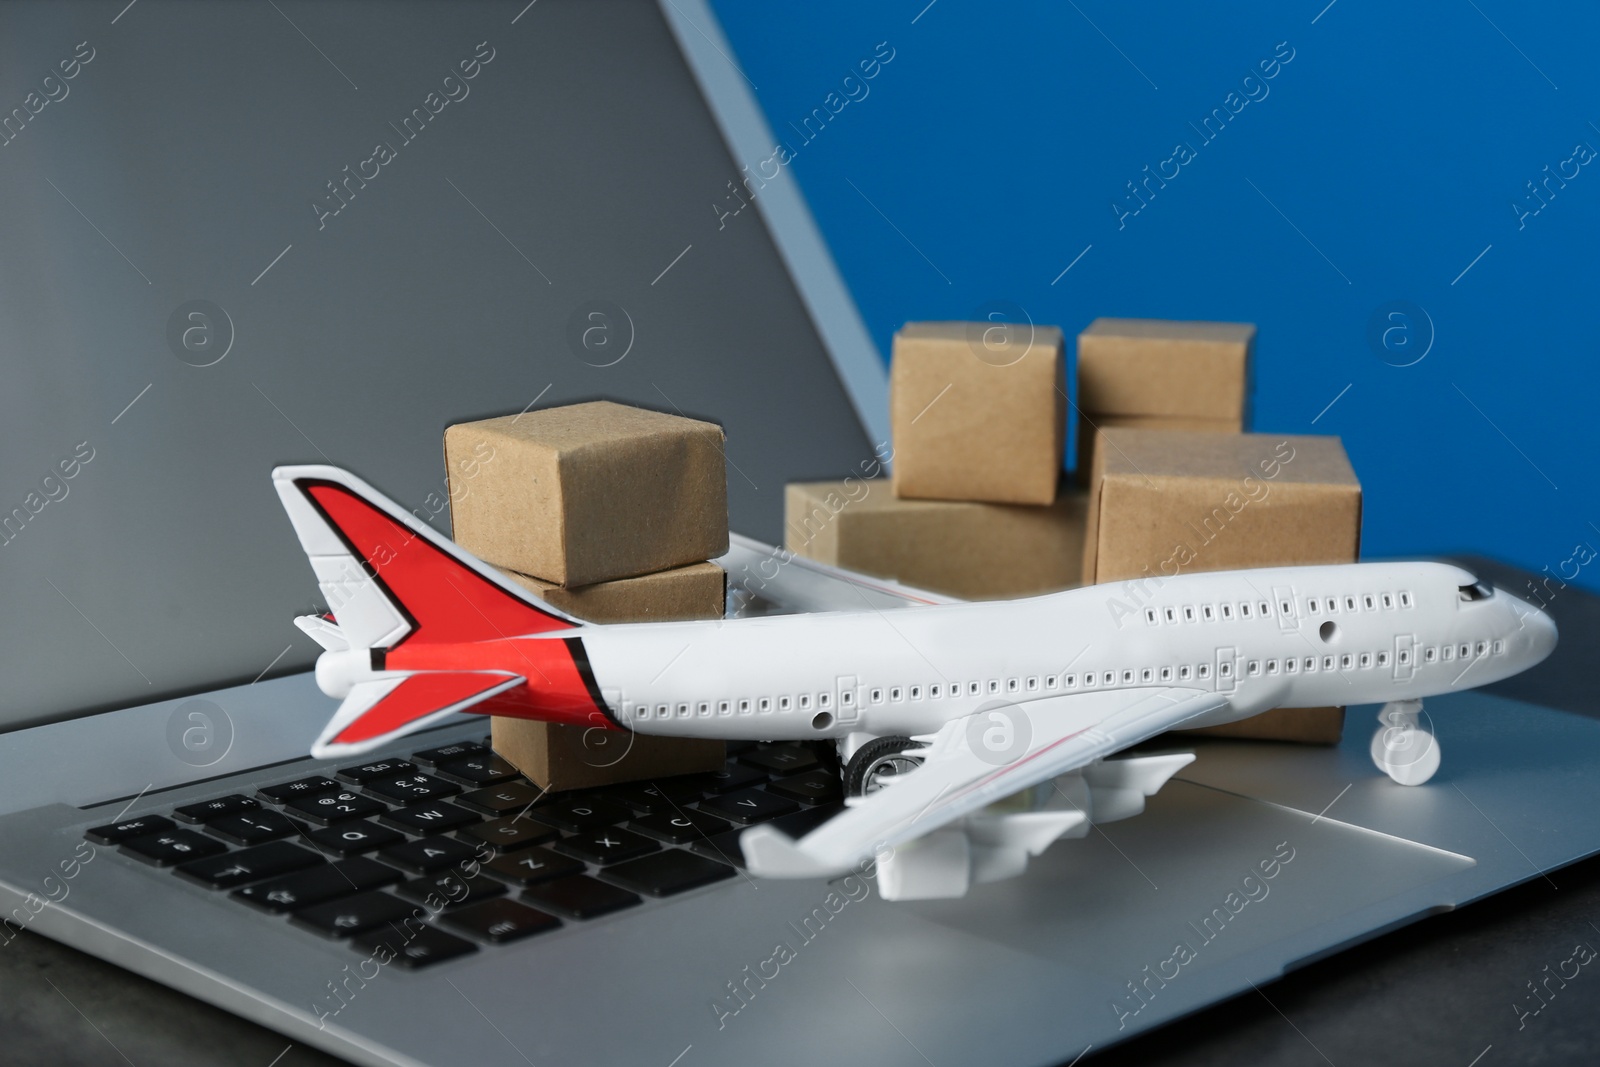 Photo of Laptop, airplane model and carton boxes on grey stone table, closeup. Courier service